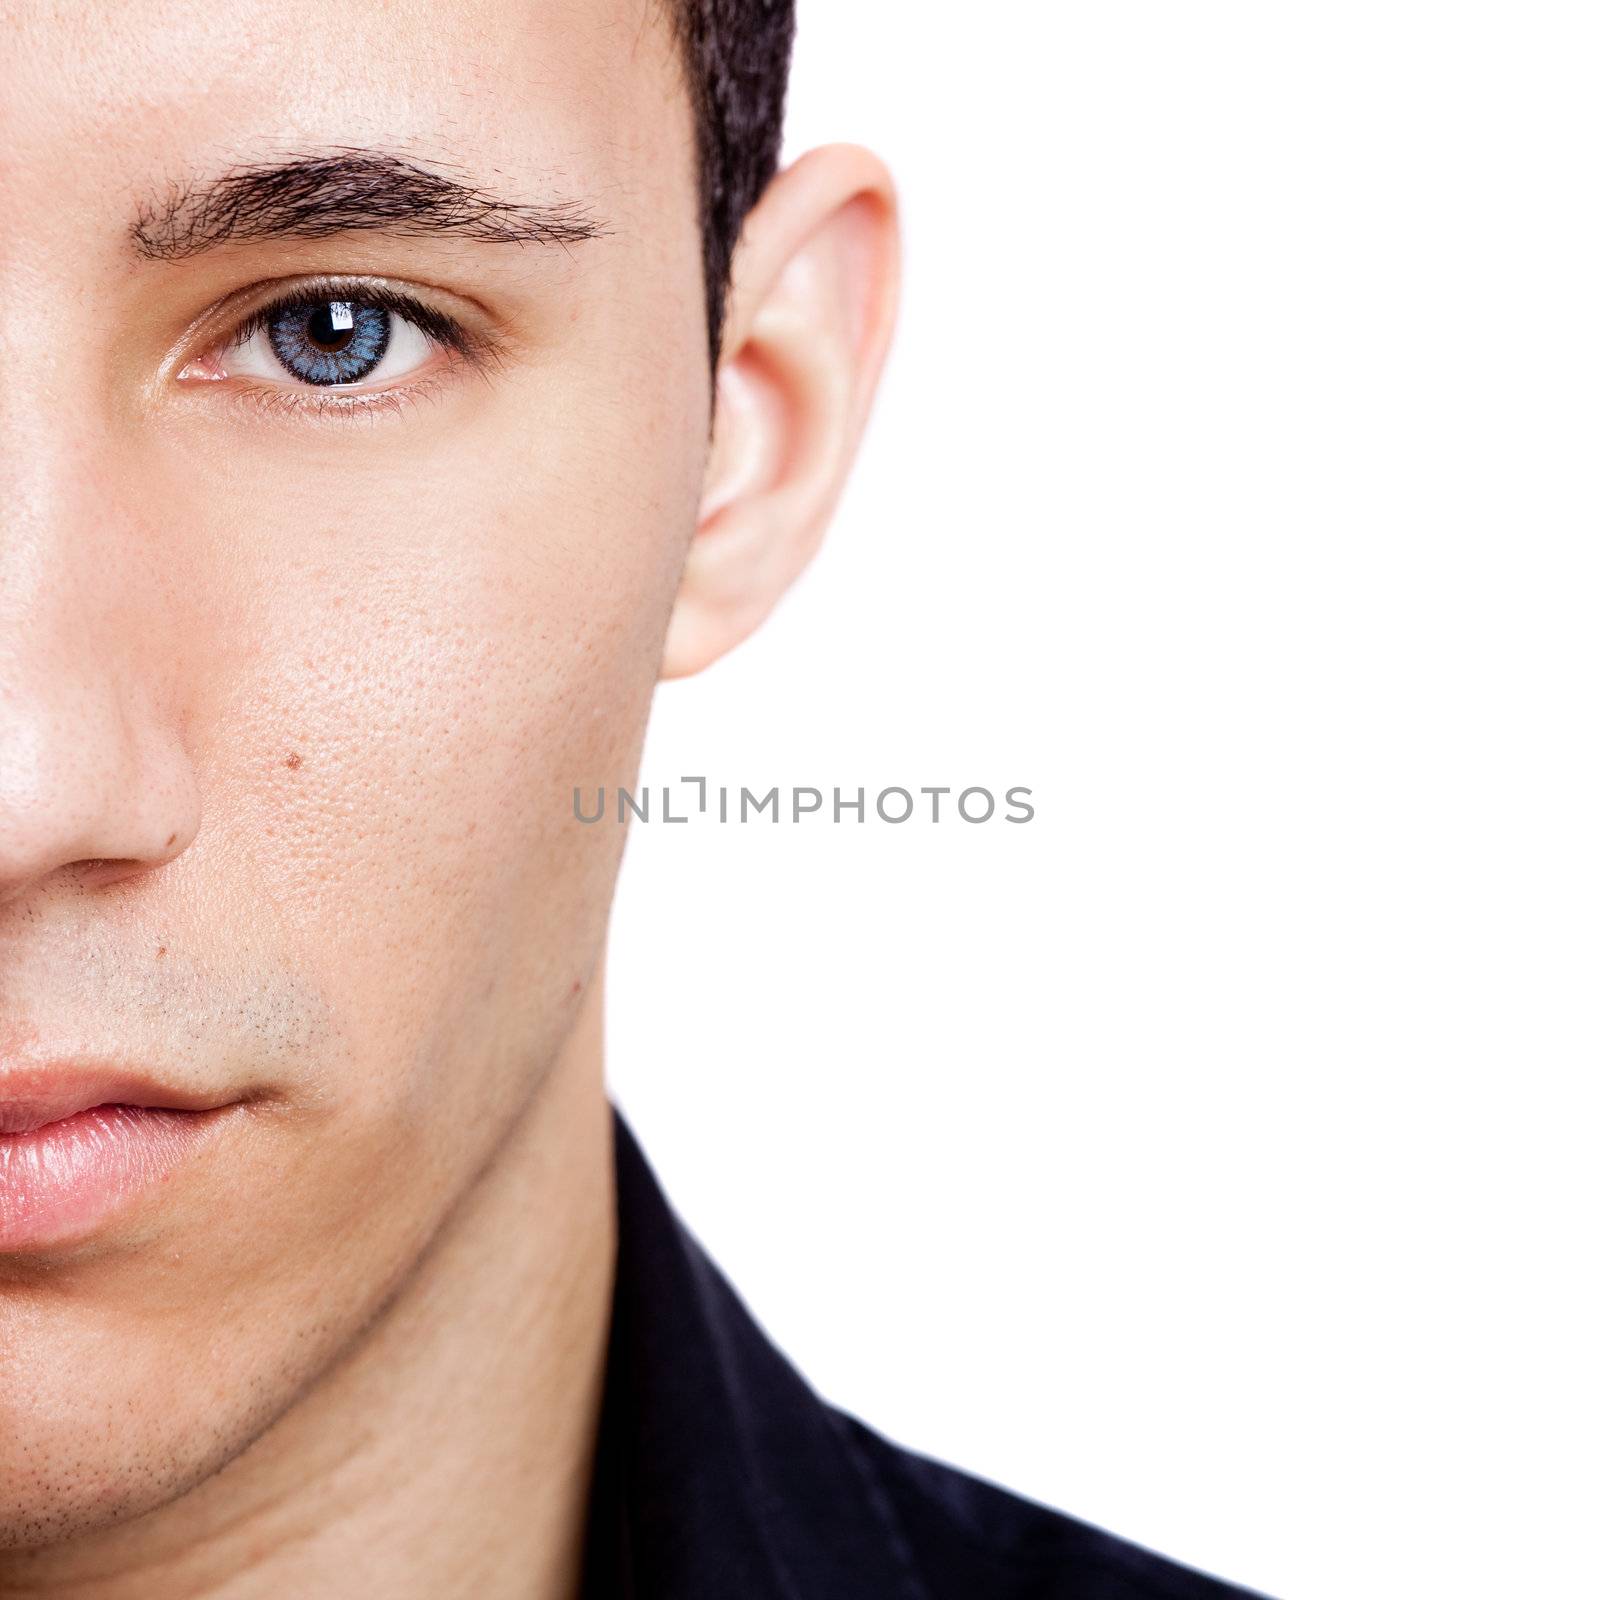 Fashion portrait of a young man with blue eyes isolated on white background